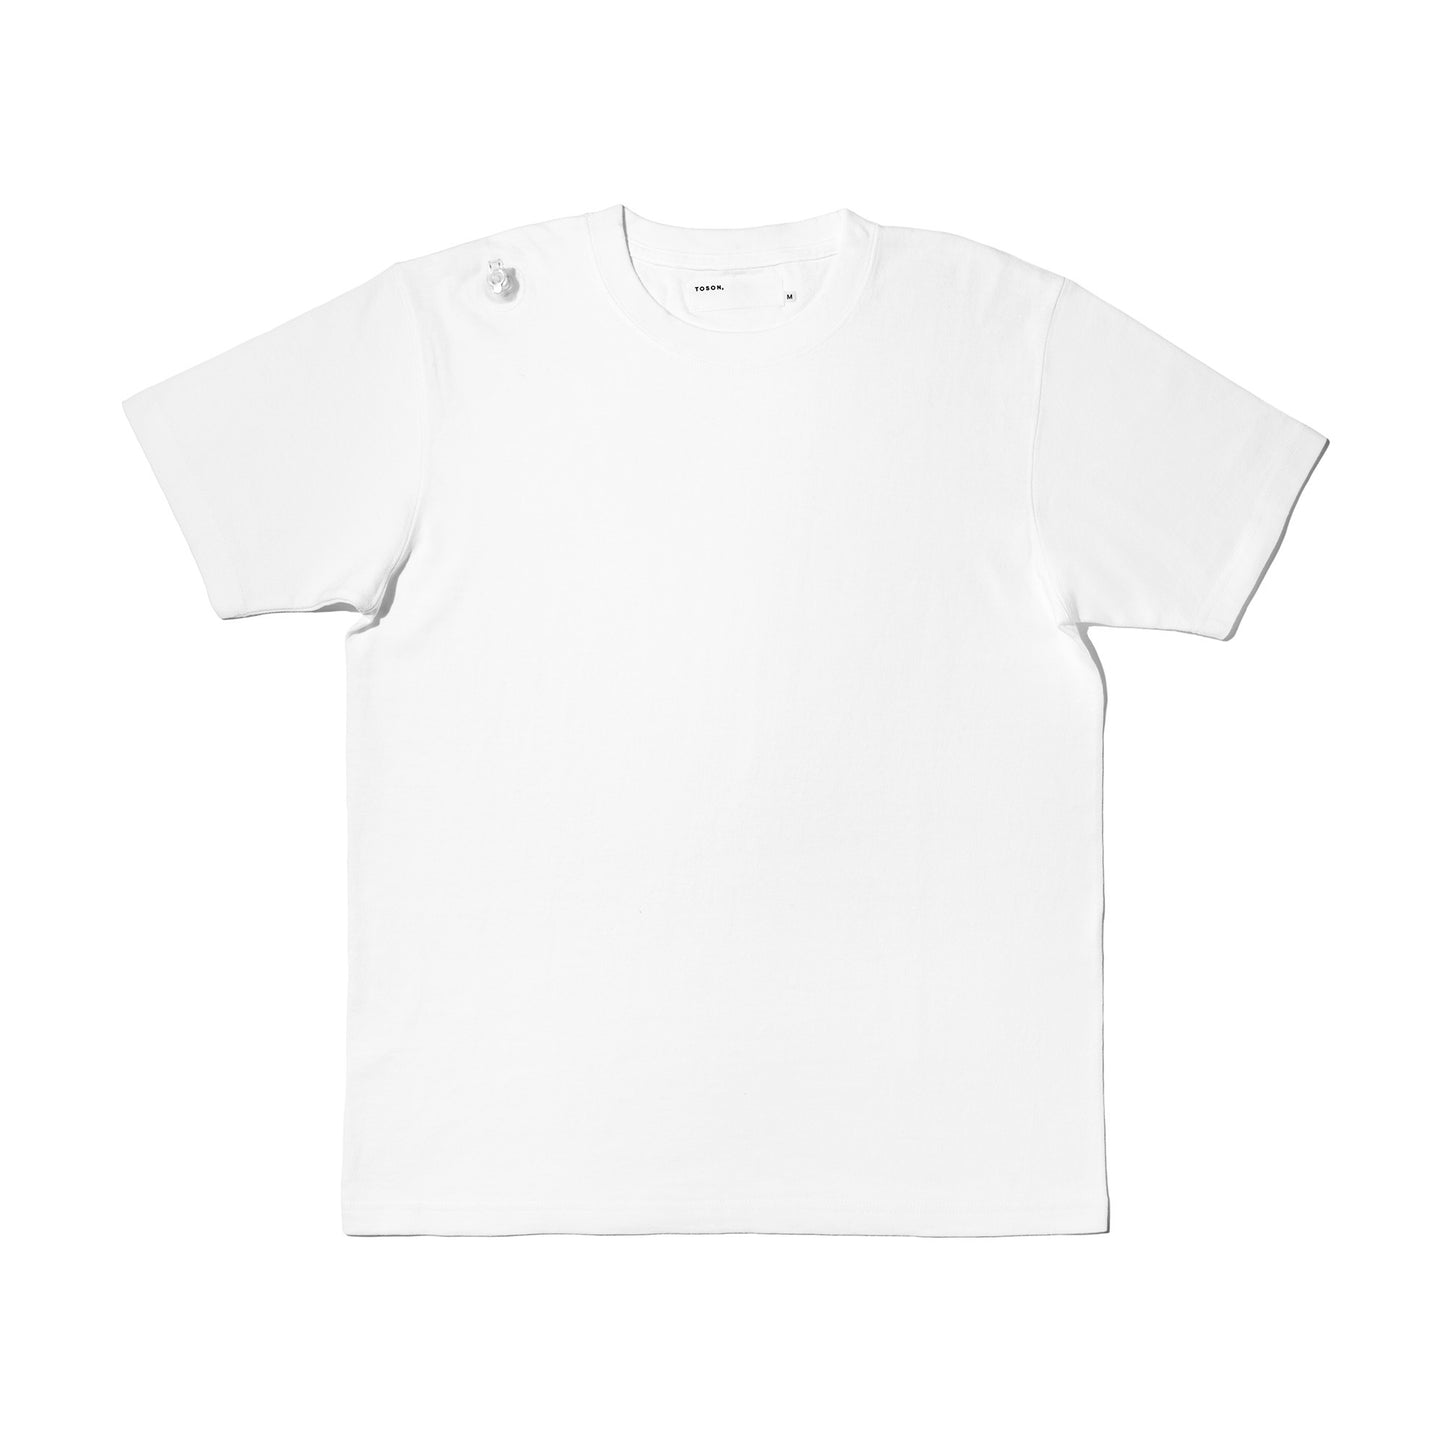 Inflatable T-shirt in White